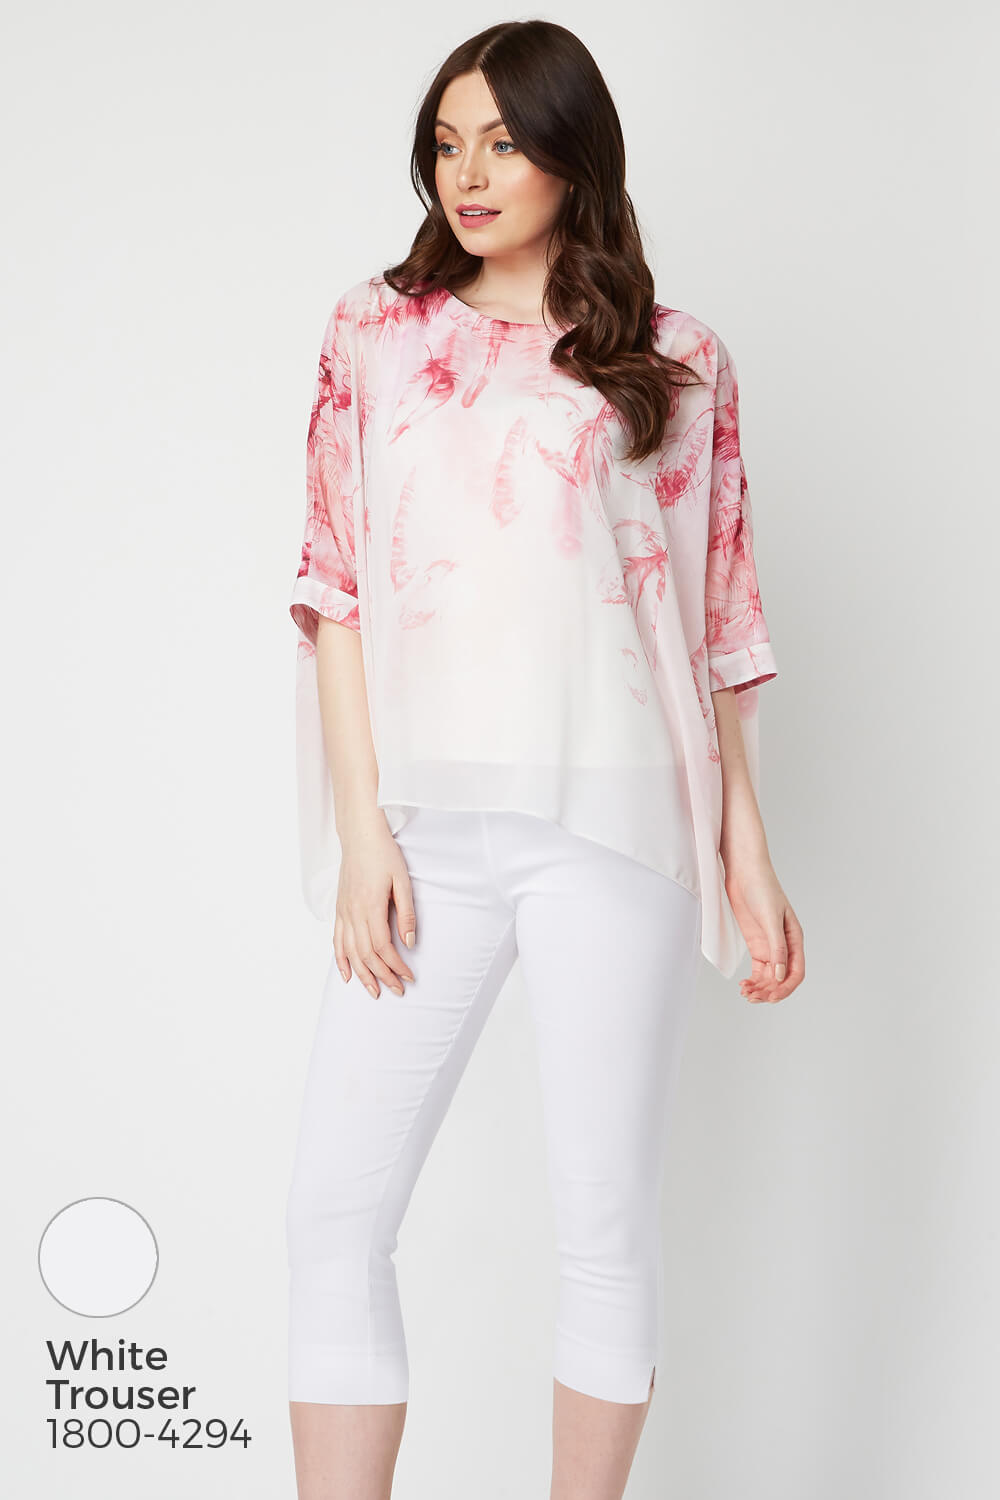 PINK Feather Border Print Overlay Top, Image 5 of 8